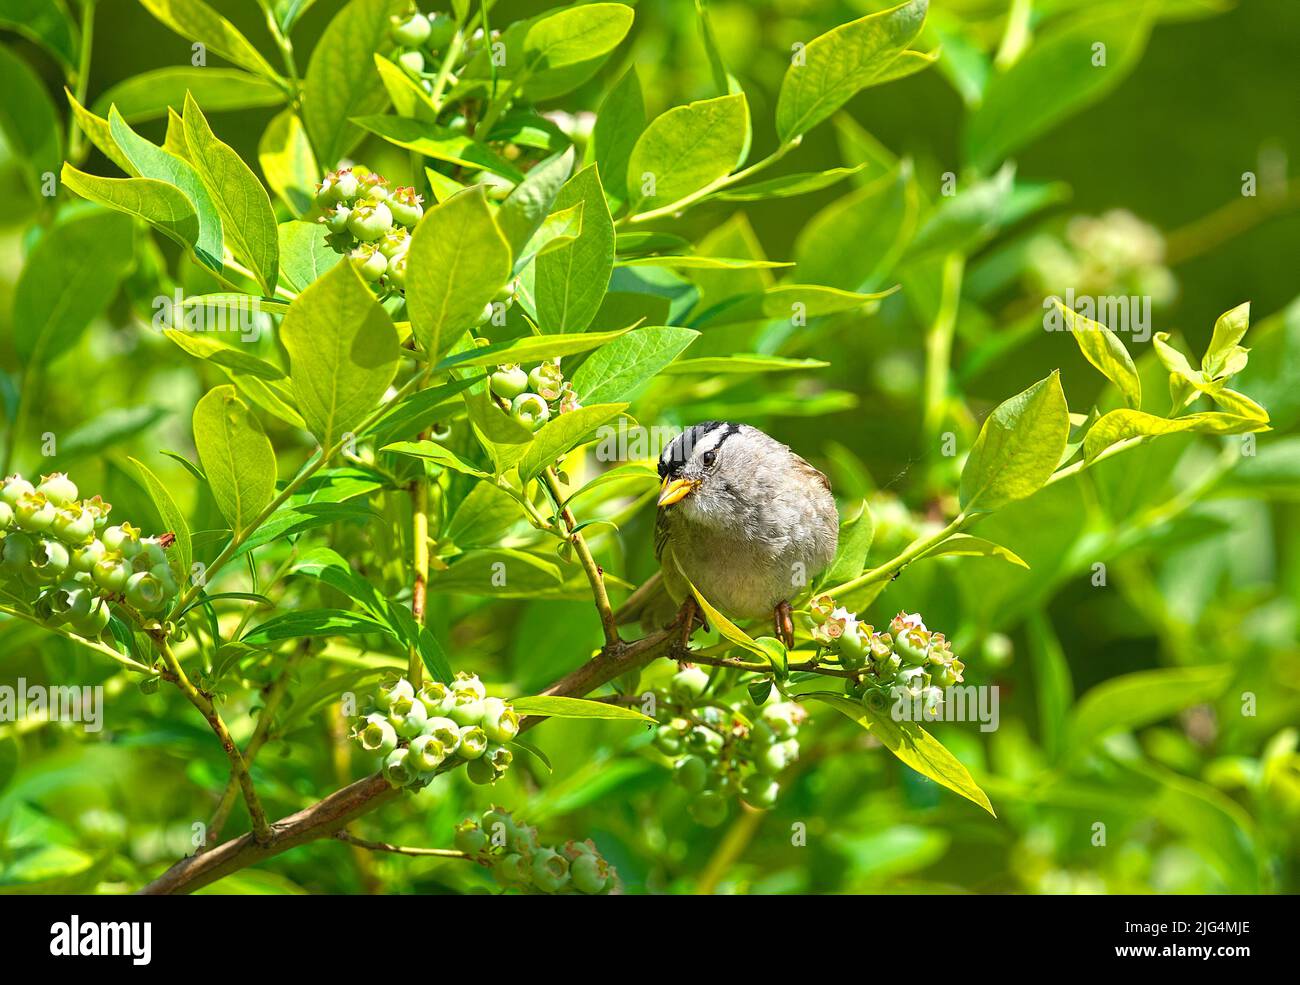 A White-crowned Sparrow (Zonotrichia leucophrys) perched on a blueberry branch with ripening berries.  British Columbia, Canada. Stock Photo